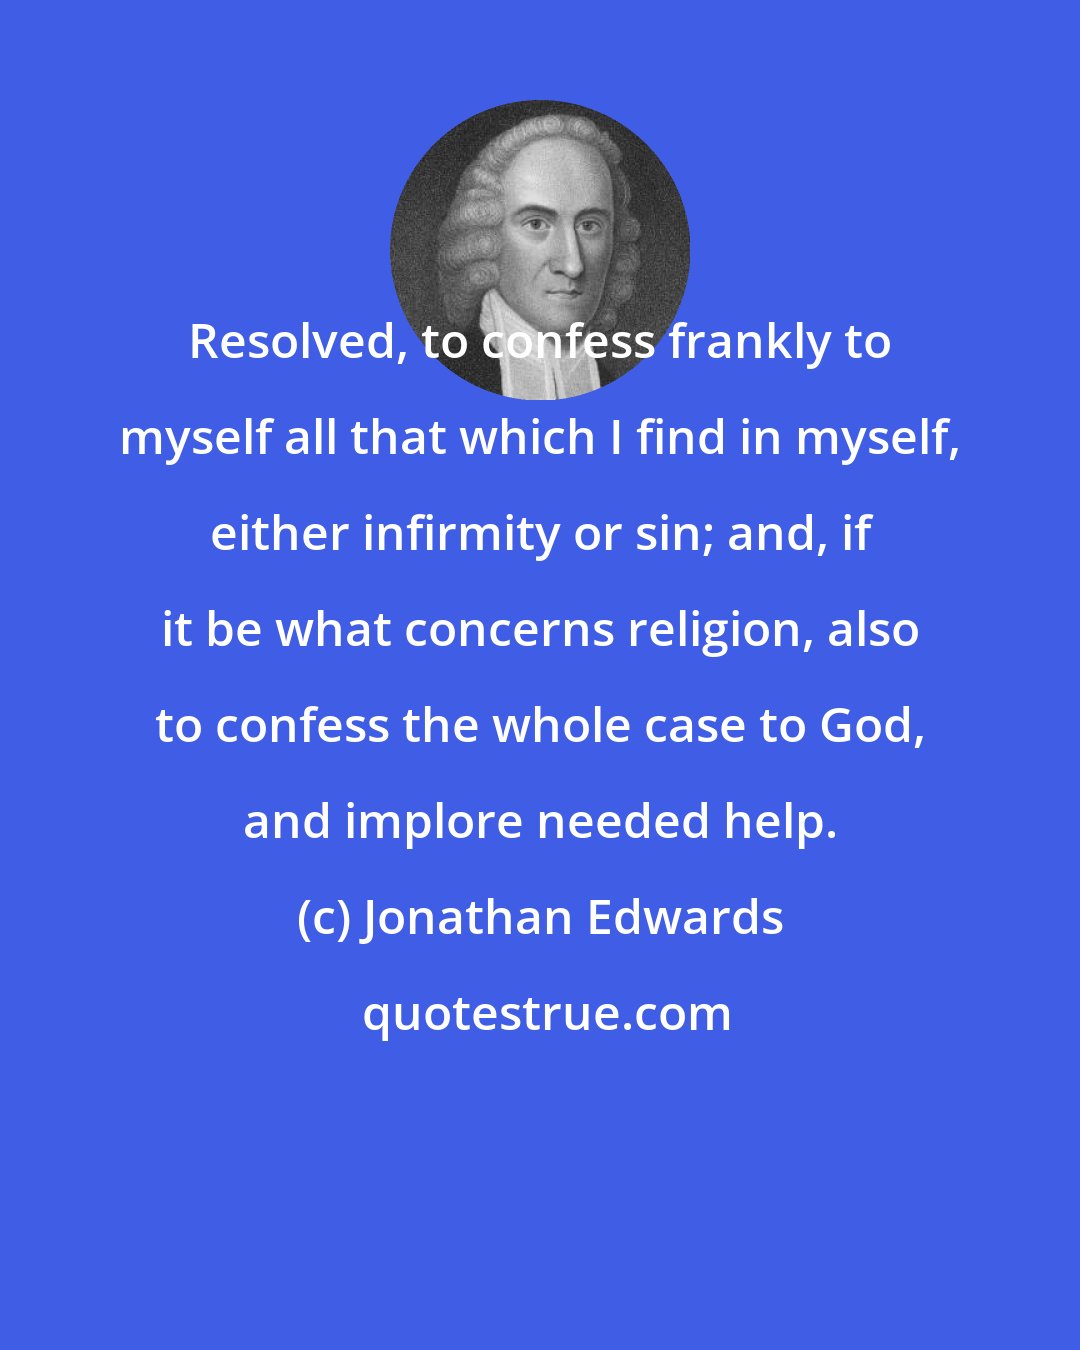 Jonathan Edwards: Resolved, to confess frankly to myself all that which I find in myself, either infirmity or sin; and, if it be what concerns religion, also to confess the whole case to God, and implore needed help.